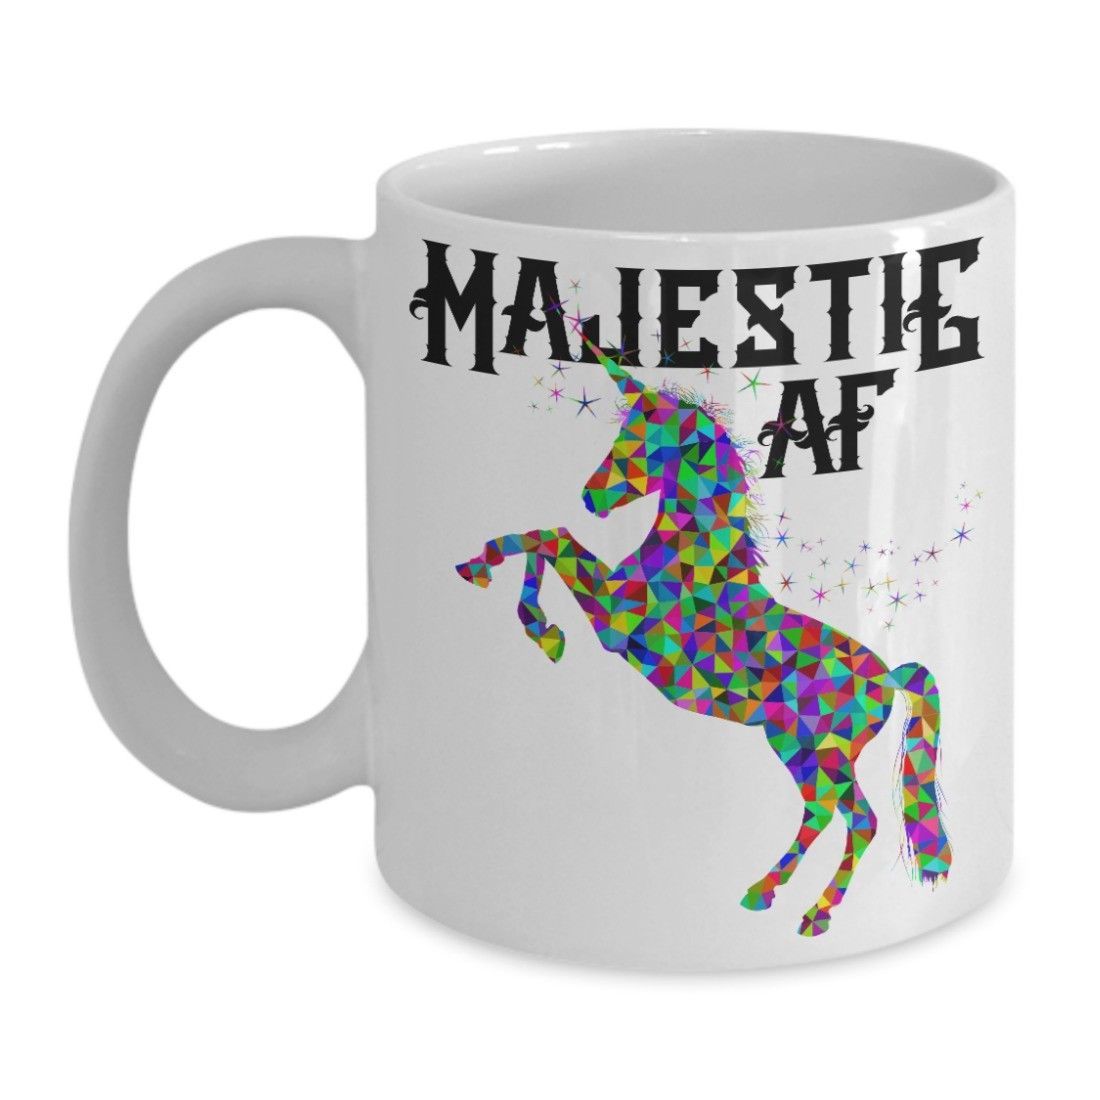 Primary image for Majestic AF Mug Unicorn Cup Coffee Gift Idea Mom Wife Girlfriend Ceramic White